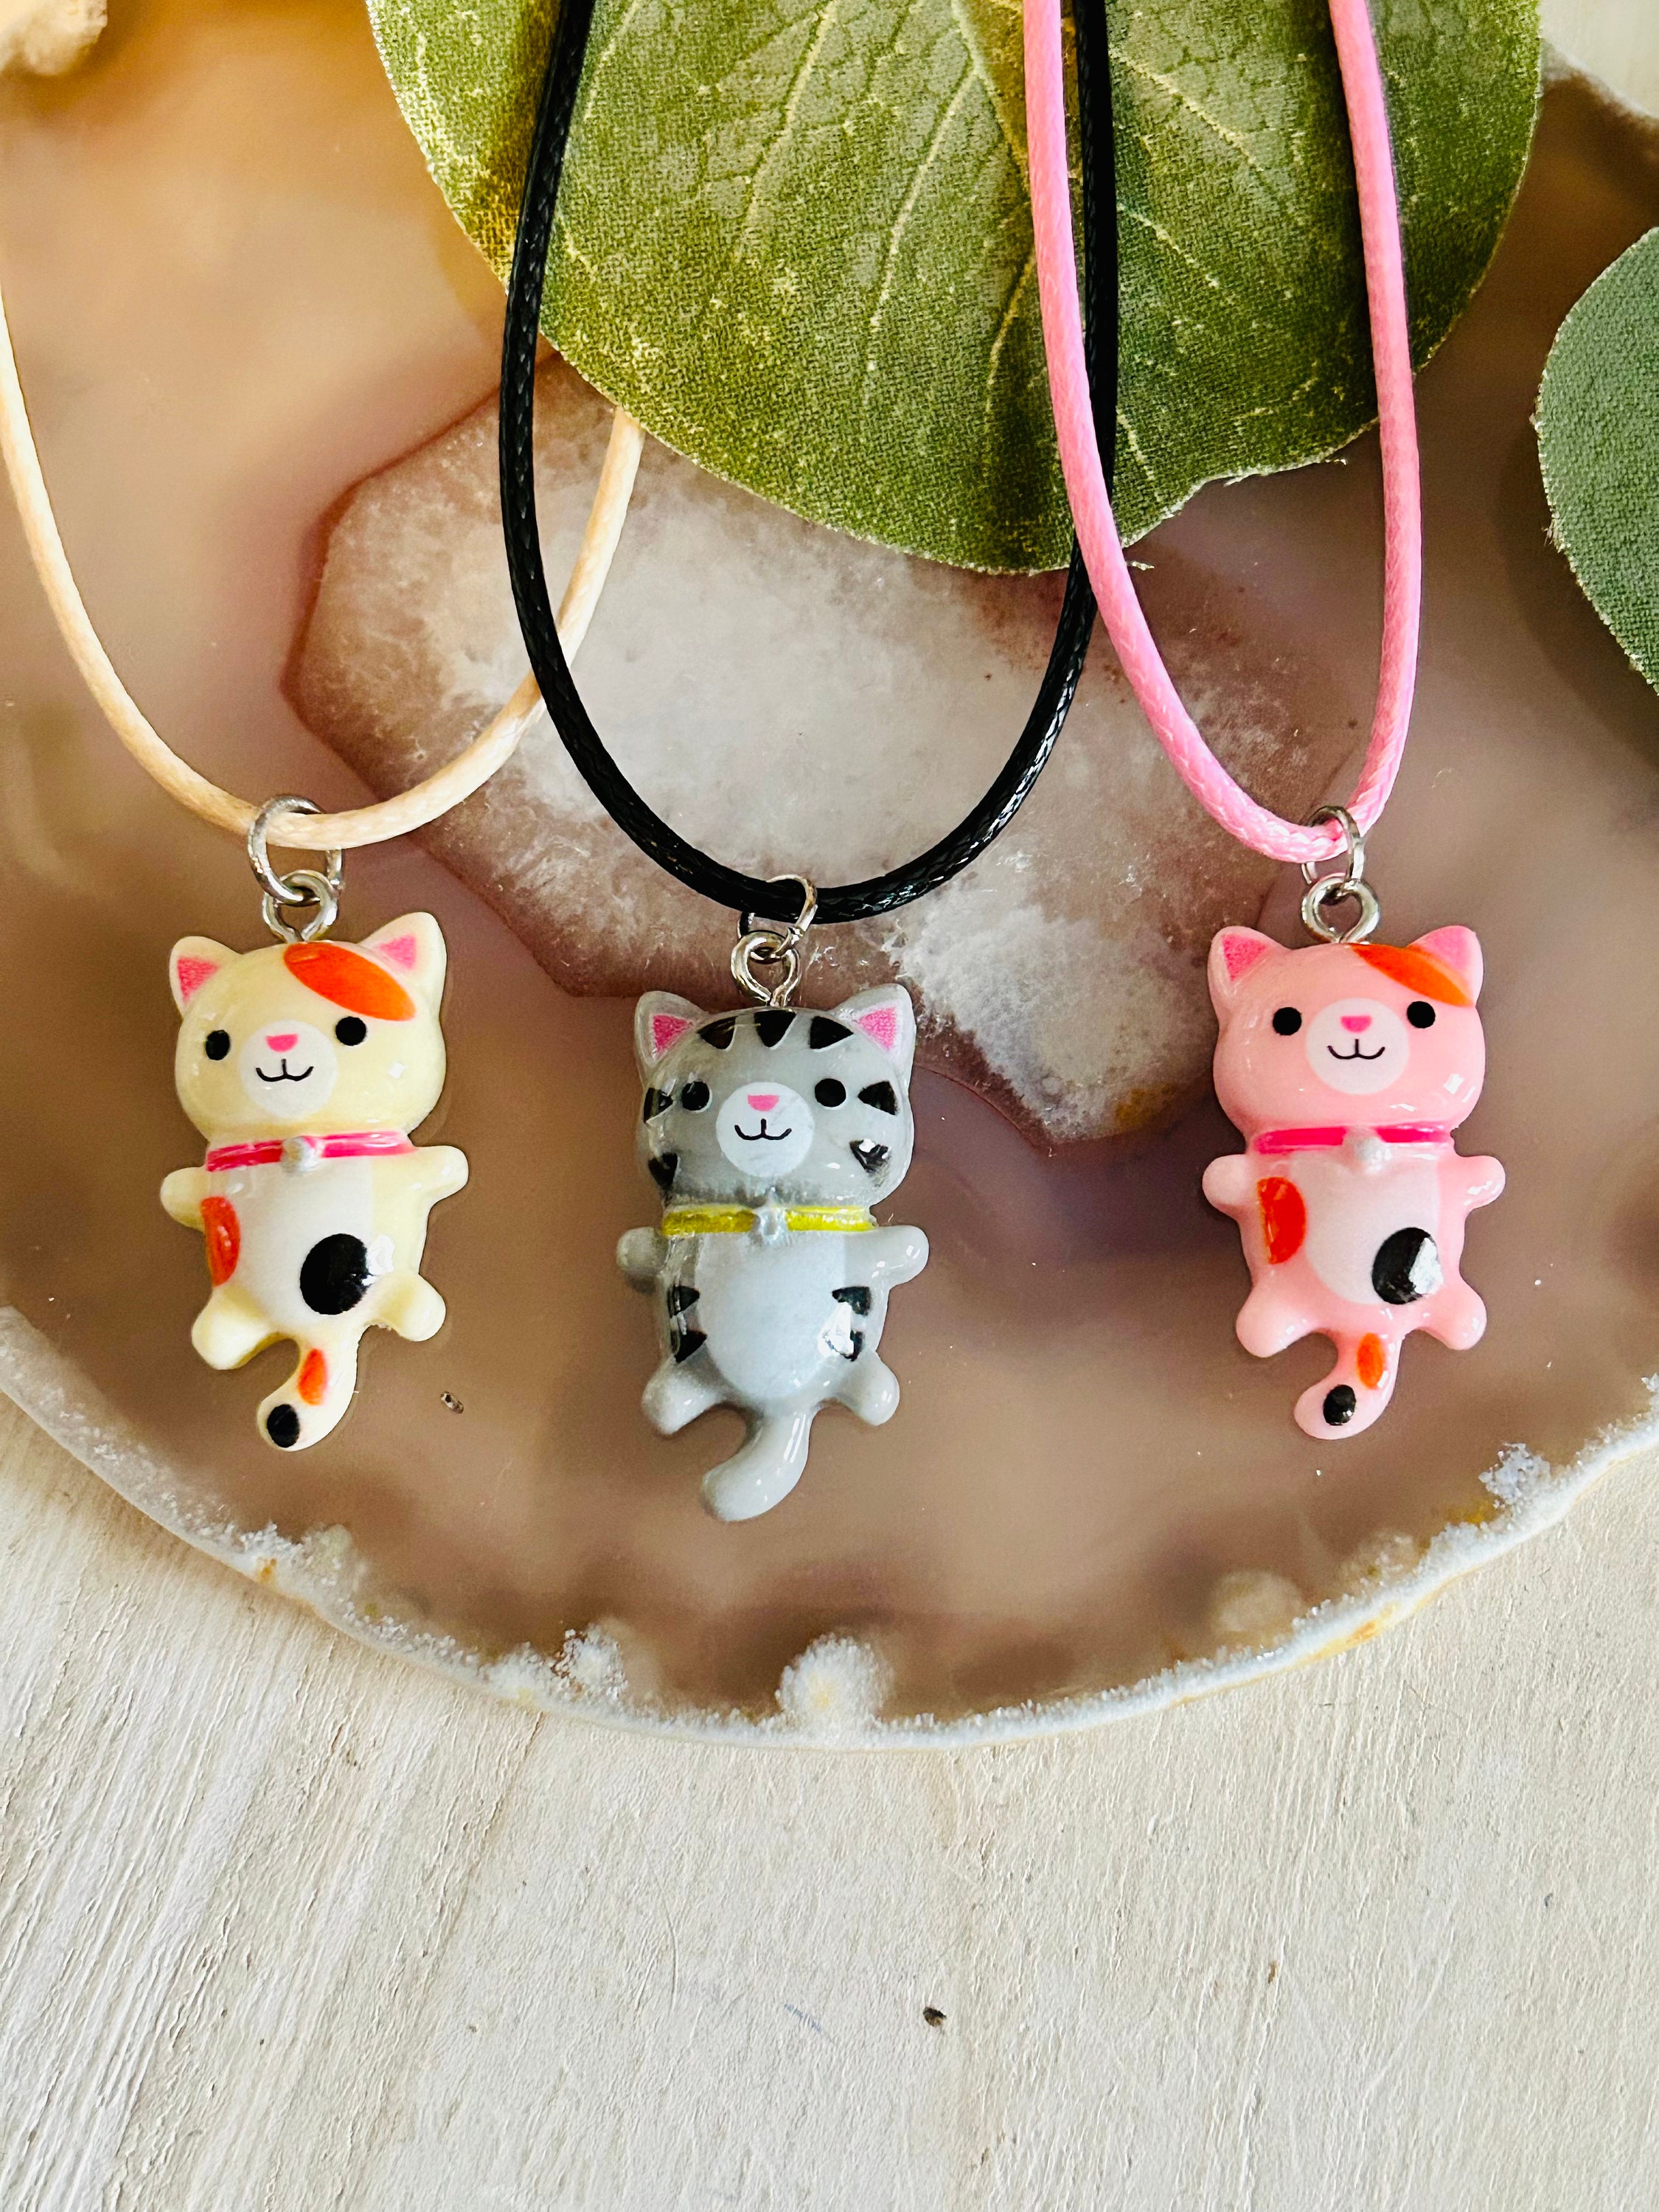 Uloveido Cute Pink Cat Pendant Necklace and Stud Earrings Cat Ring Animal  Jewelry Set for Granddaughter Teen Girls (size 5)